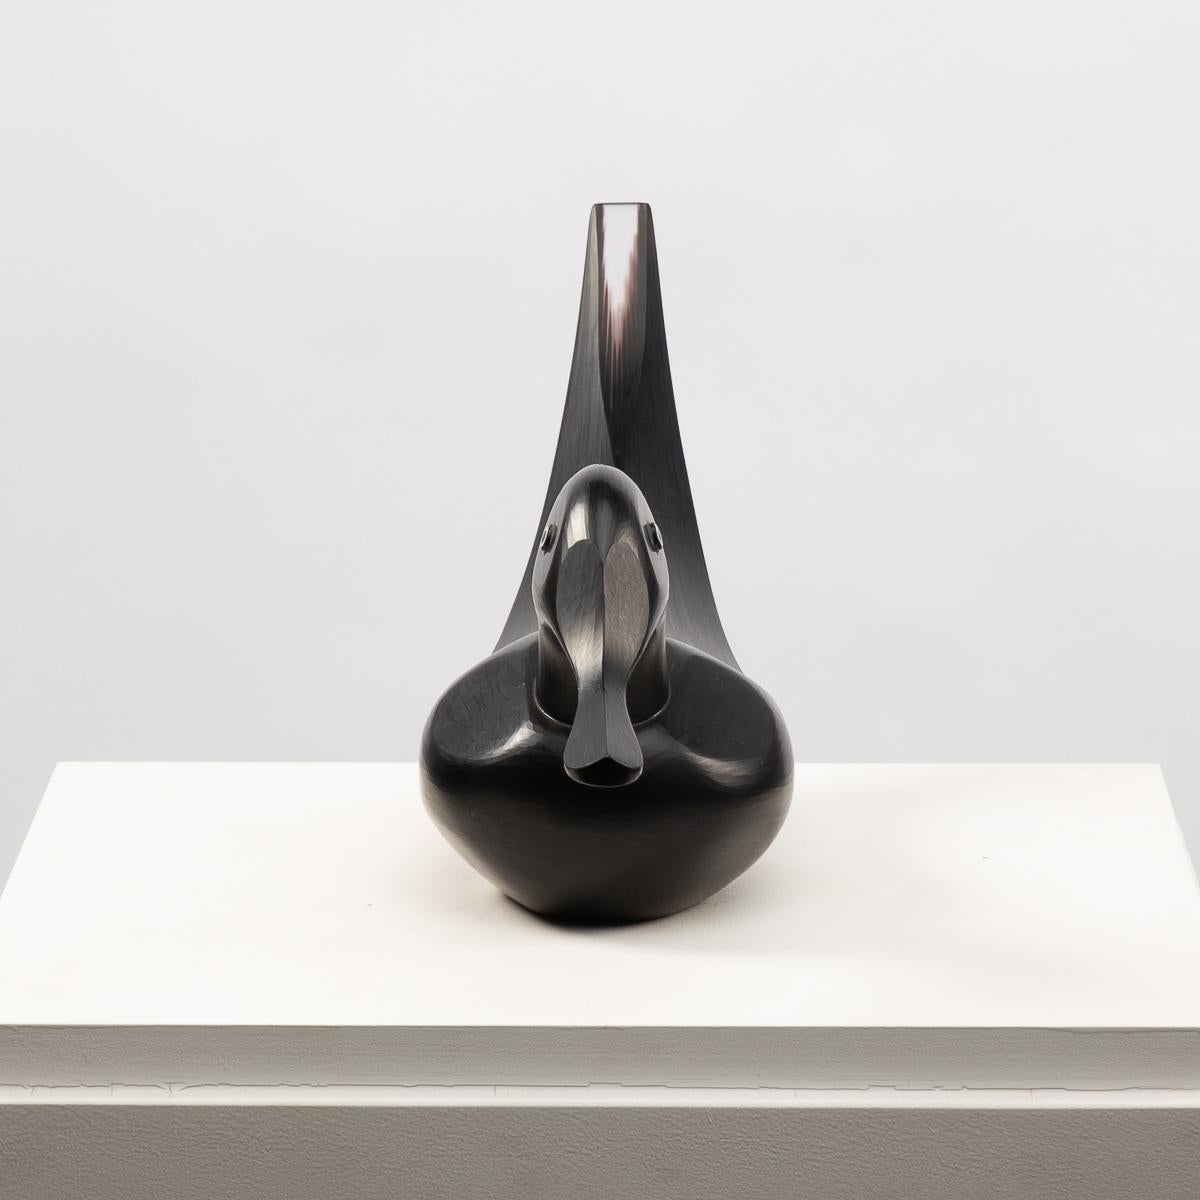 Blown glass sculpture, black cane rods, carved by wheel. Murrine eyes. This series requires very high skills and were produced in very small quantities. This example designed 1978 produced in 1984. 


We are located in Belgium; we present Postwar